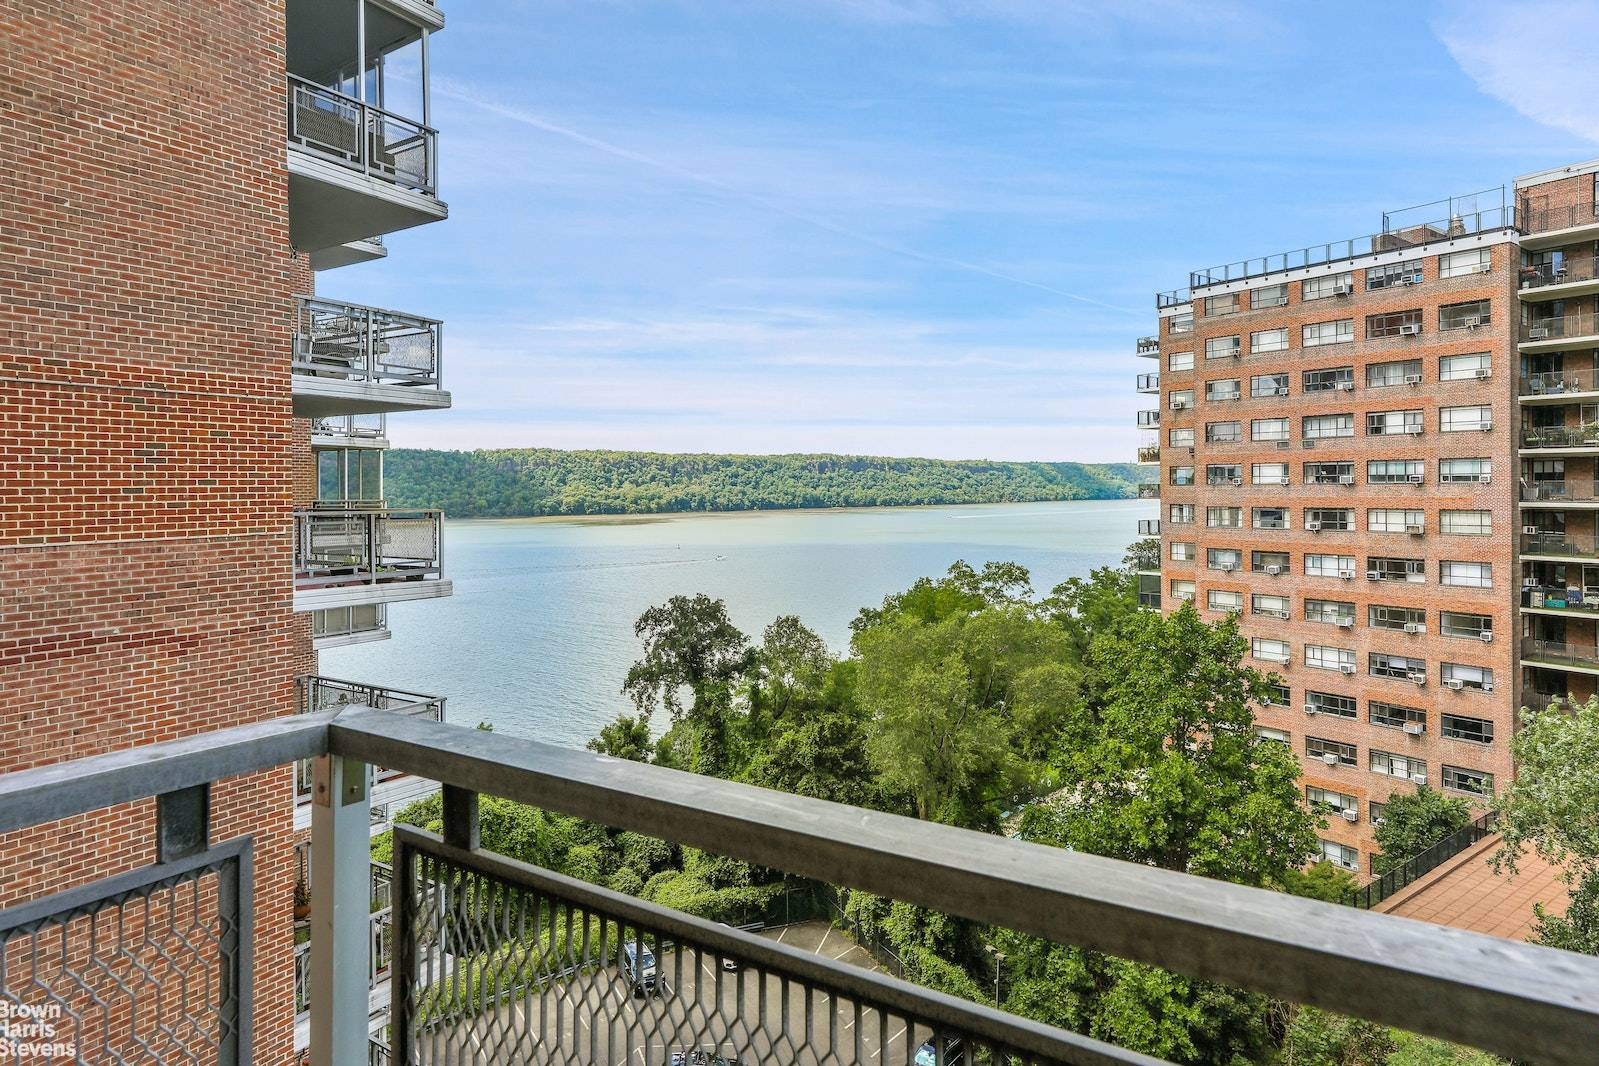 Riverfront large Jr4 One Bedroom easily converted to 2 bedrooms, at thecoveted River Terrace Coop with magnificent Hudson amp ; Palisades Views.